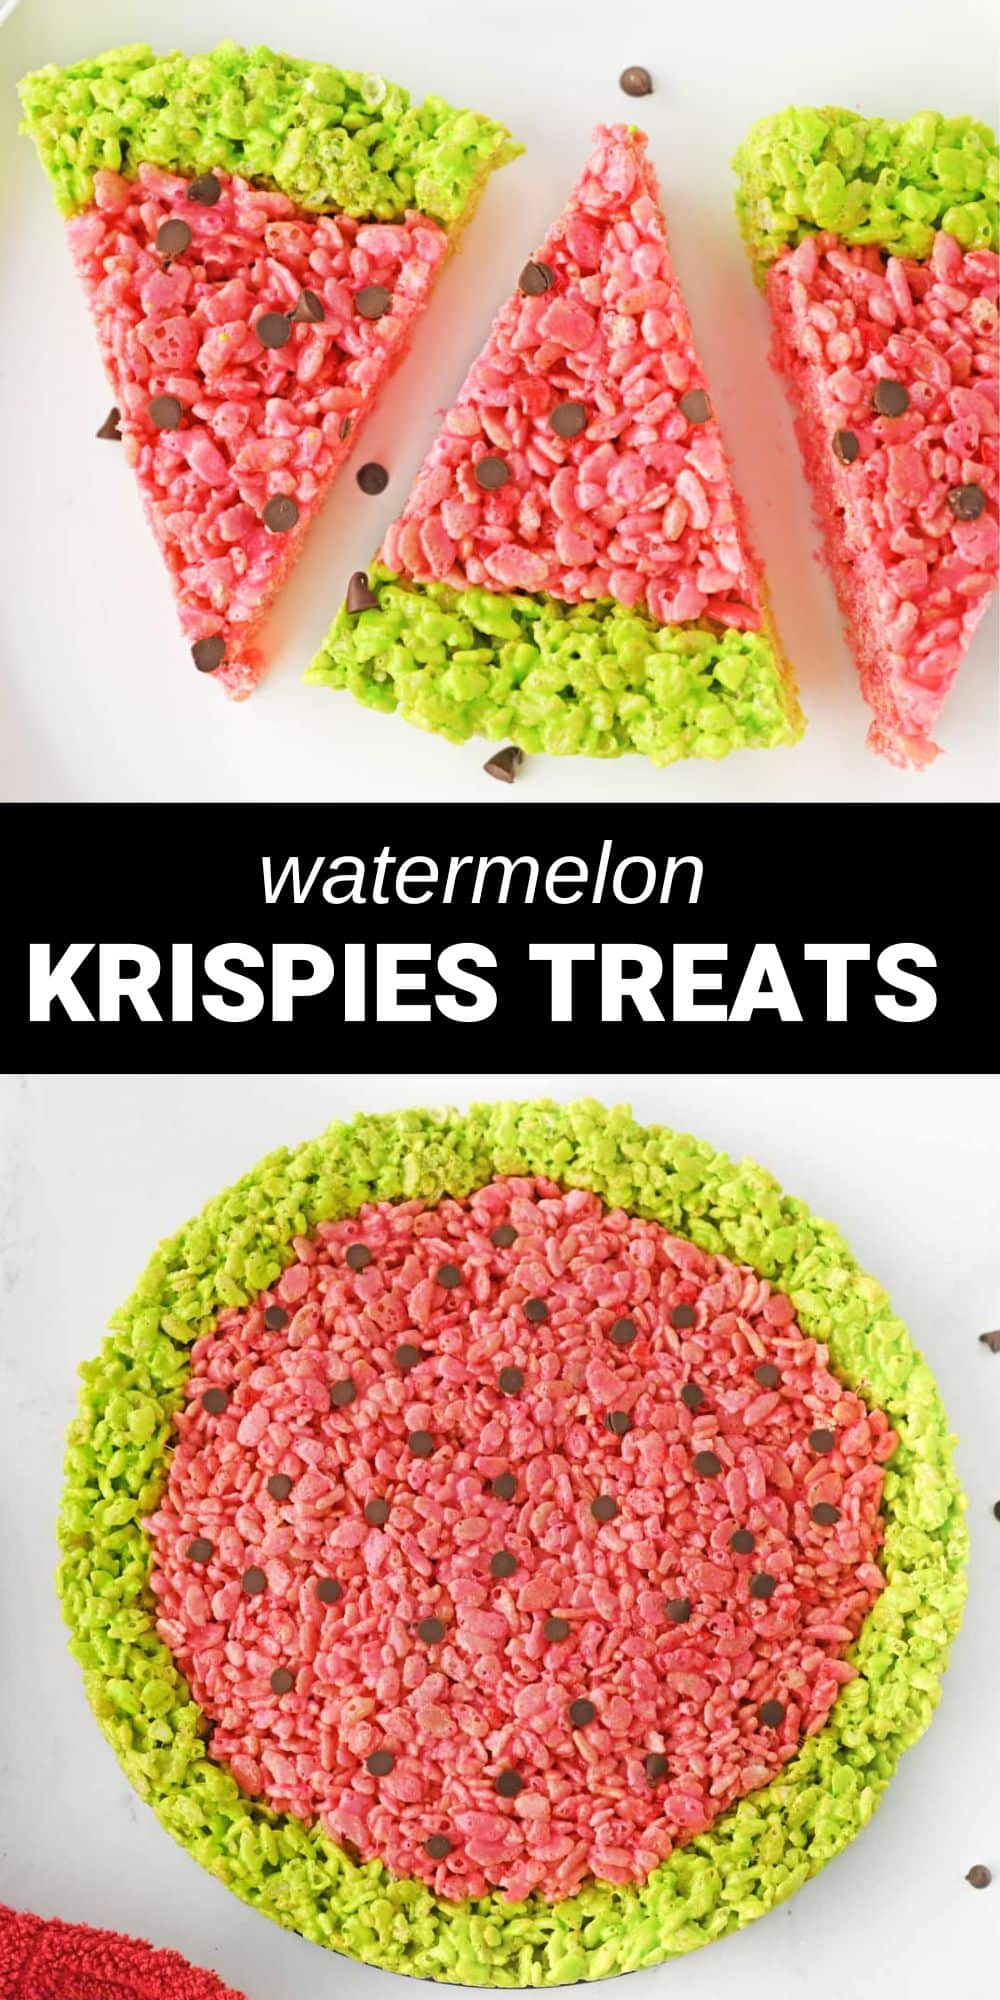 These watermelon Rice Krispie treats are such a fun summer dessert. They have all the delicious flavor of a traditional Rice Krispie treat, and they’re colored and shaped to look like cute little watermelon slices!